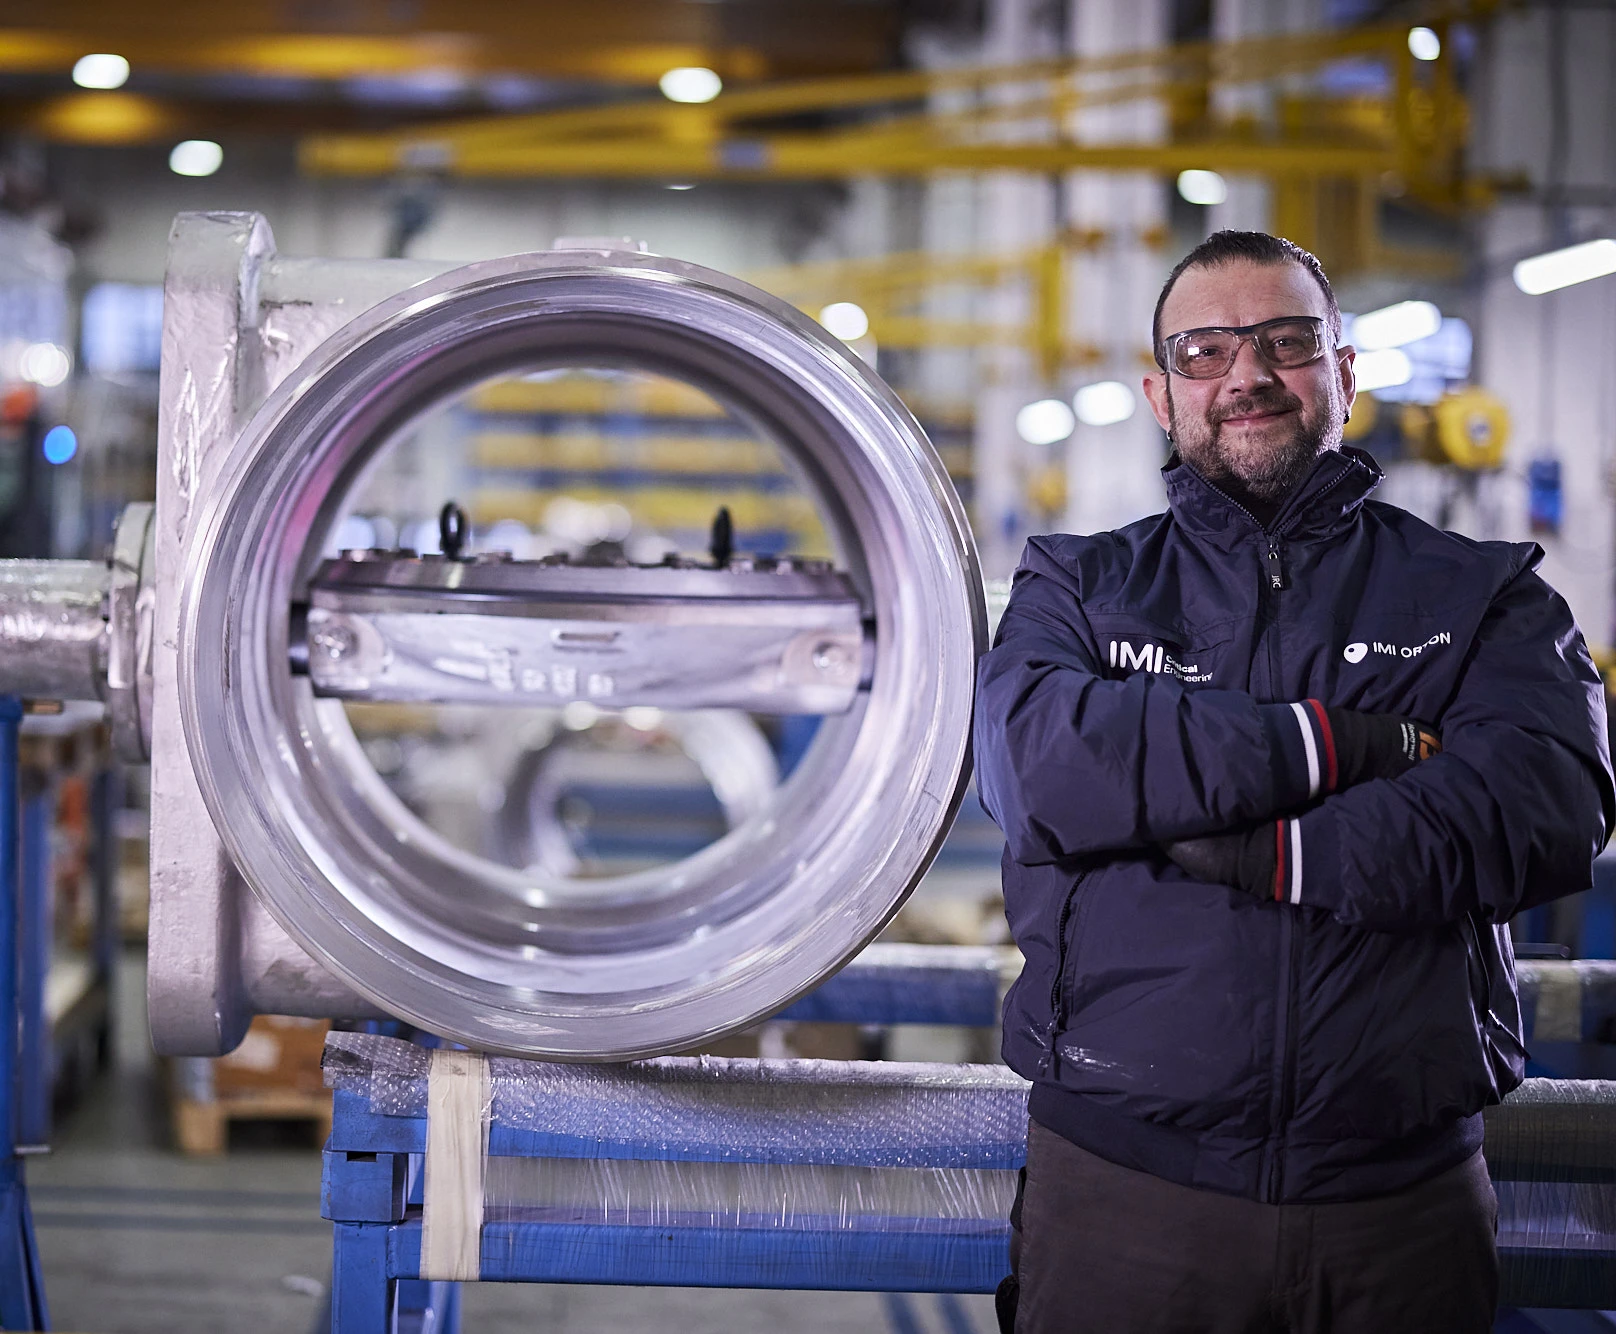 Expertly poised beside a valve, a man oversees IMI Orton's Italian facility, a hub of industrial innovation.